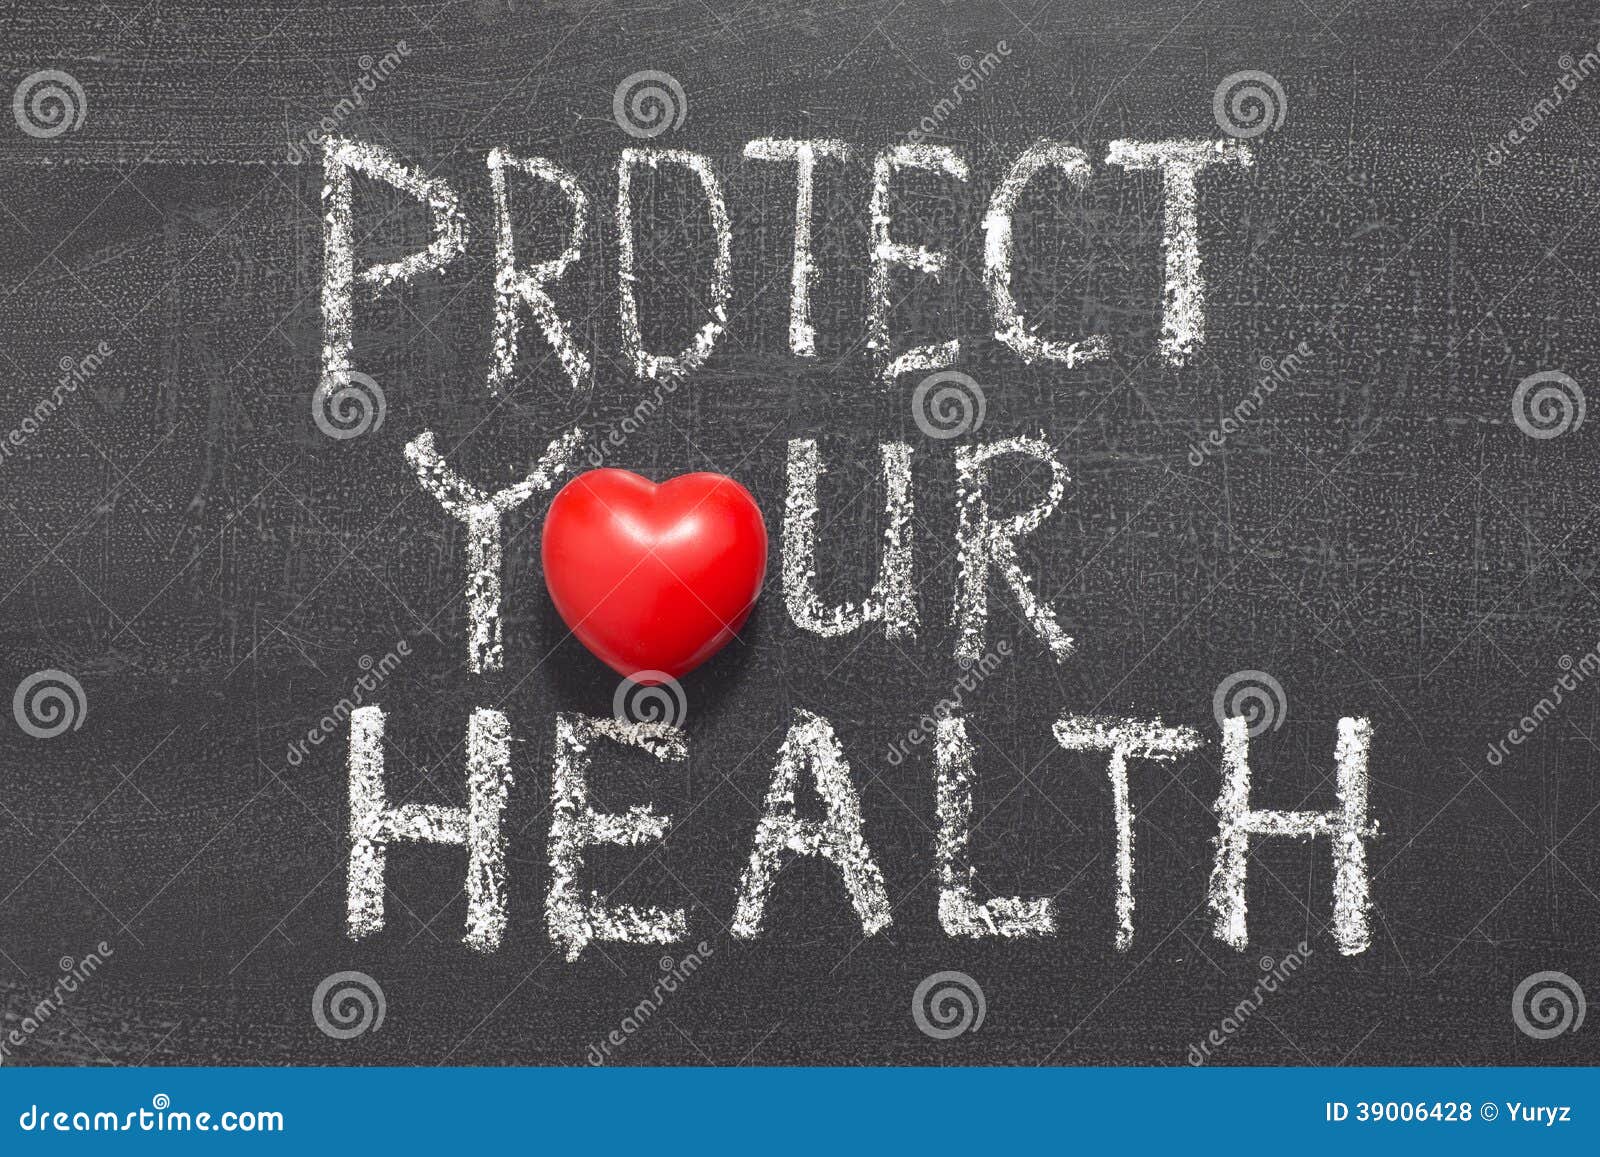 protect your health